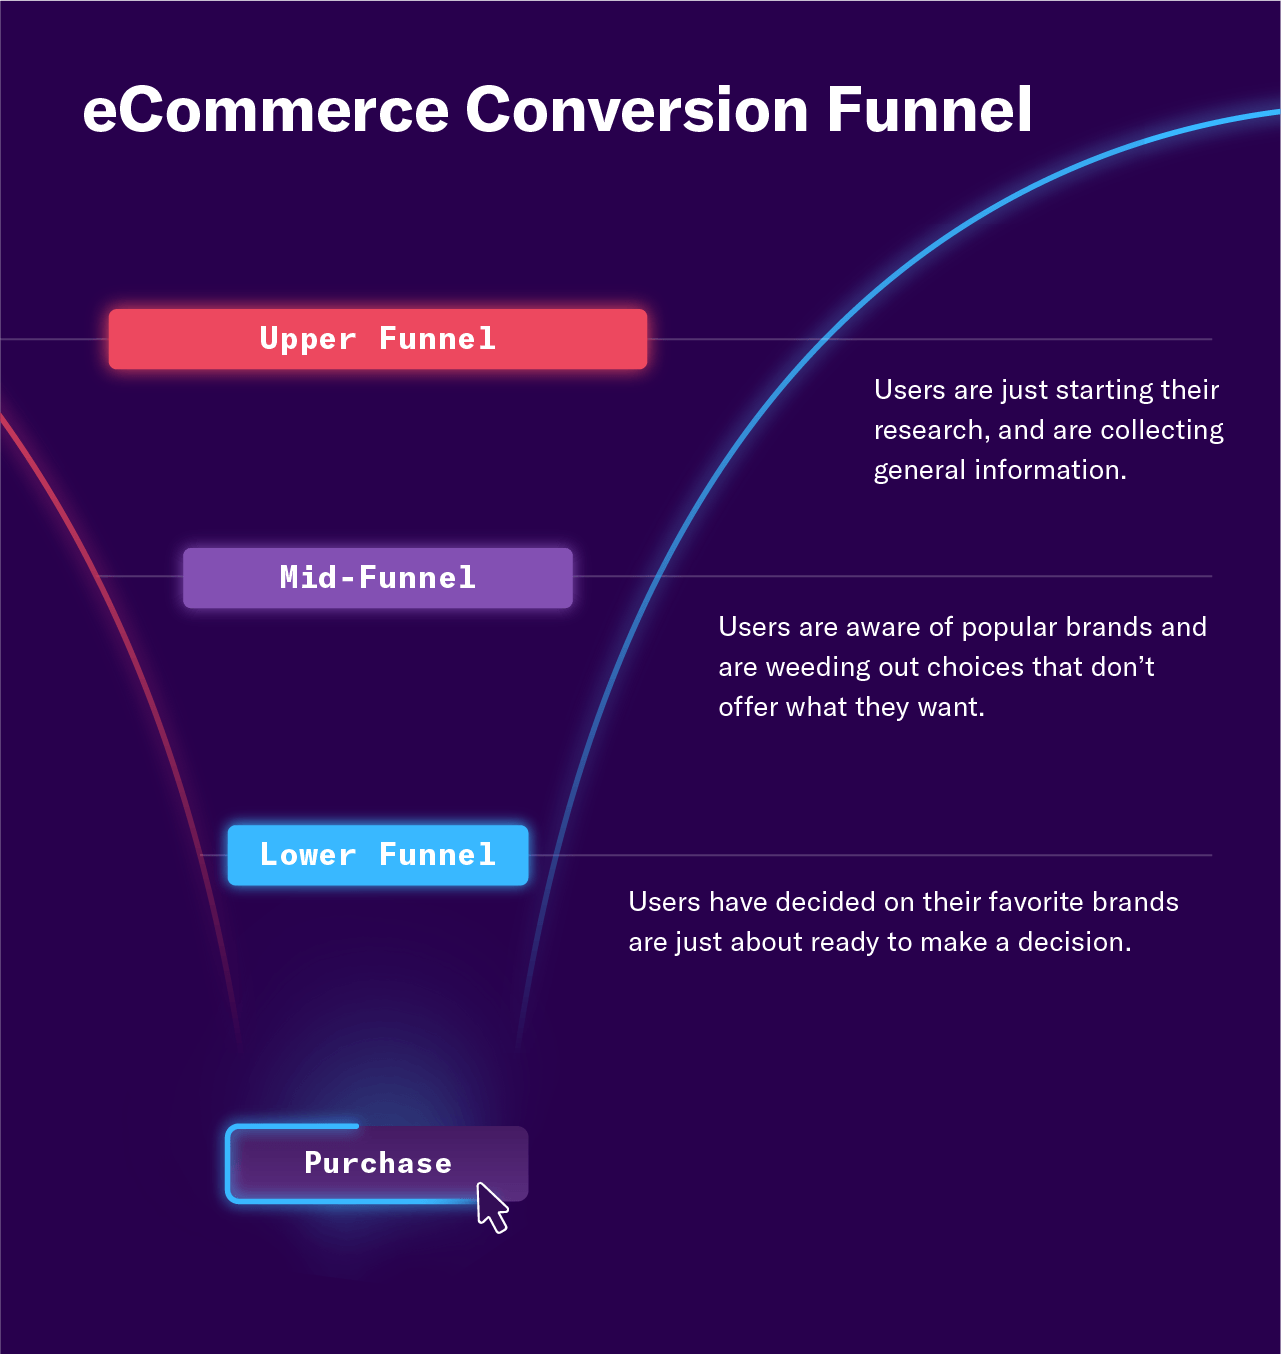 The three stages of the eComm conversion funnel, leading to purchase at the bottom